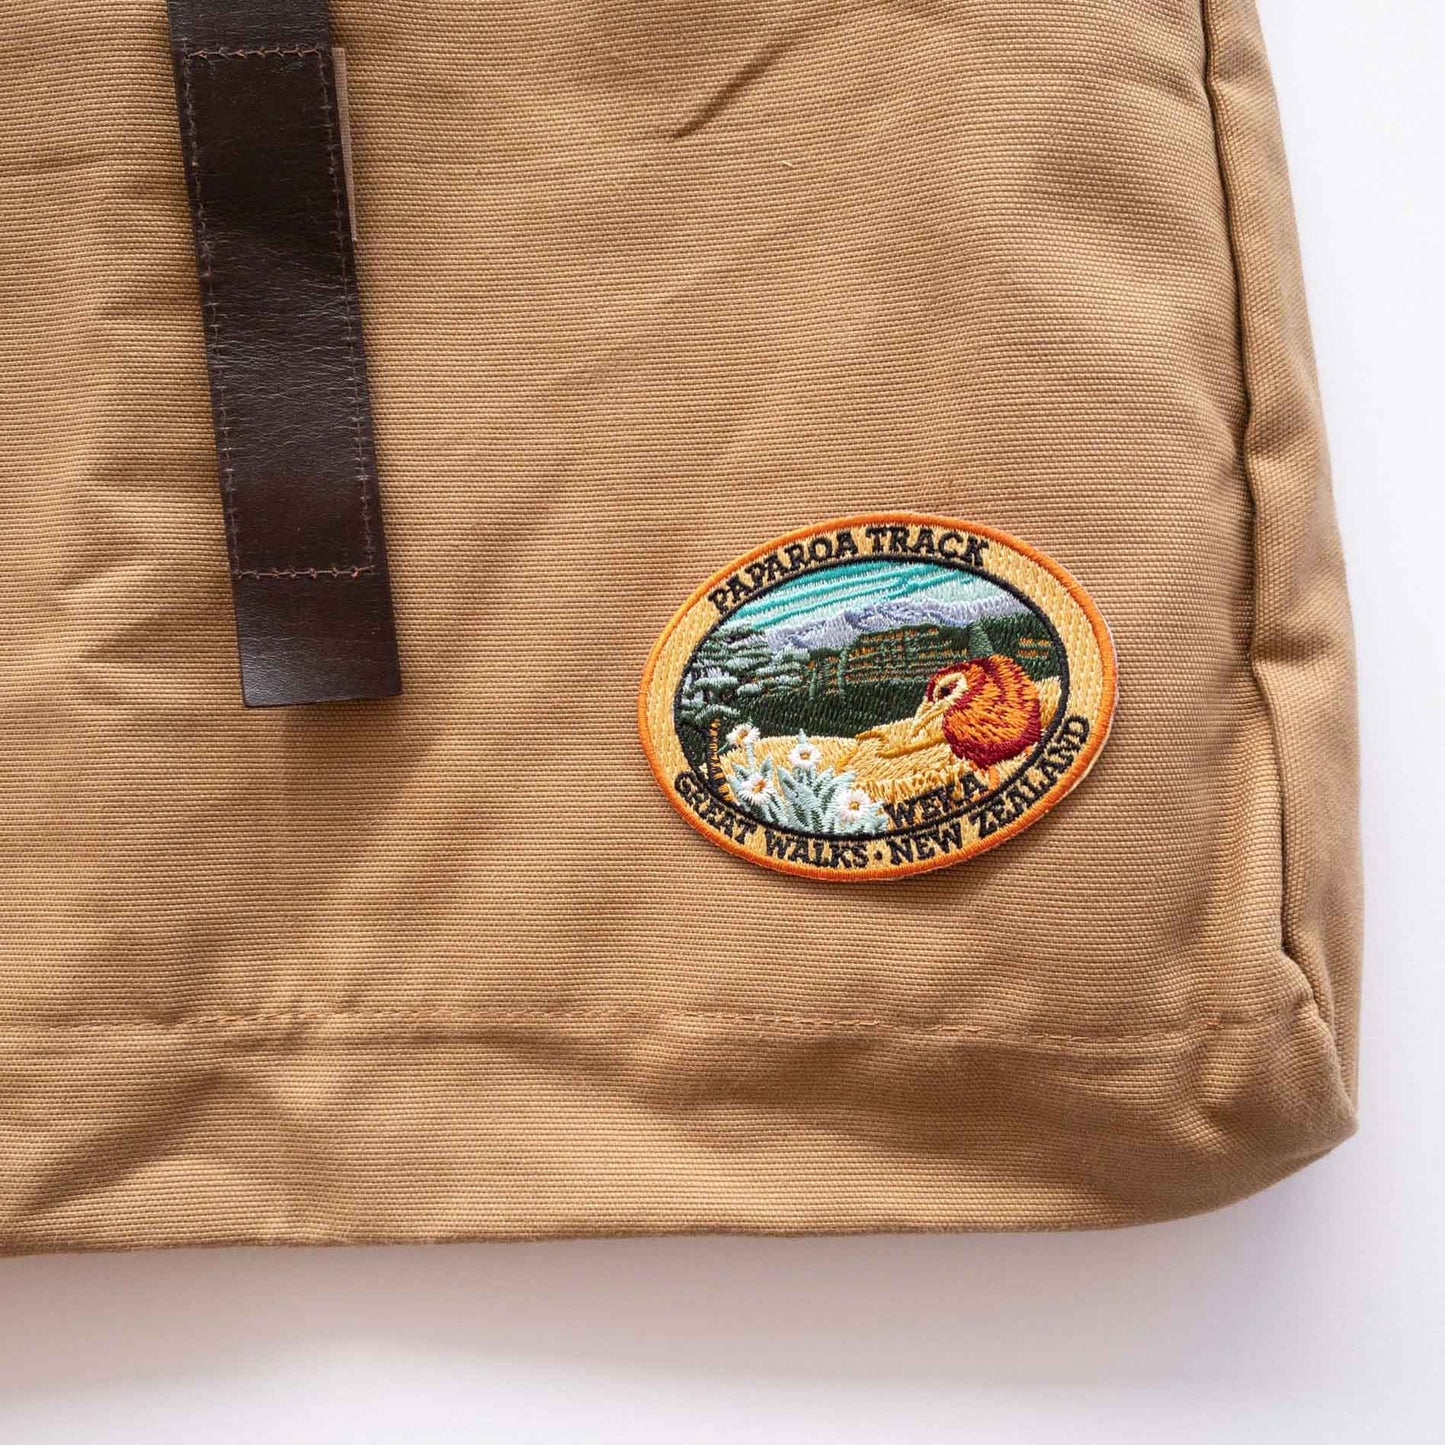 Oval, embroidered Paparoa Track patch, with a weka, green hills, mountain daisy and tussock, on a brown canvas bag.